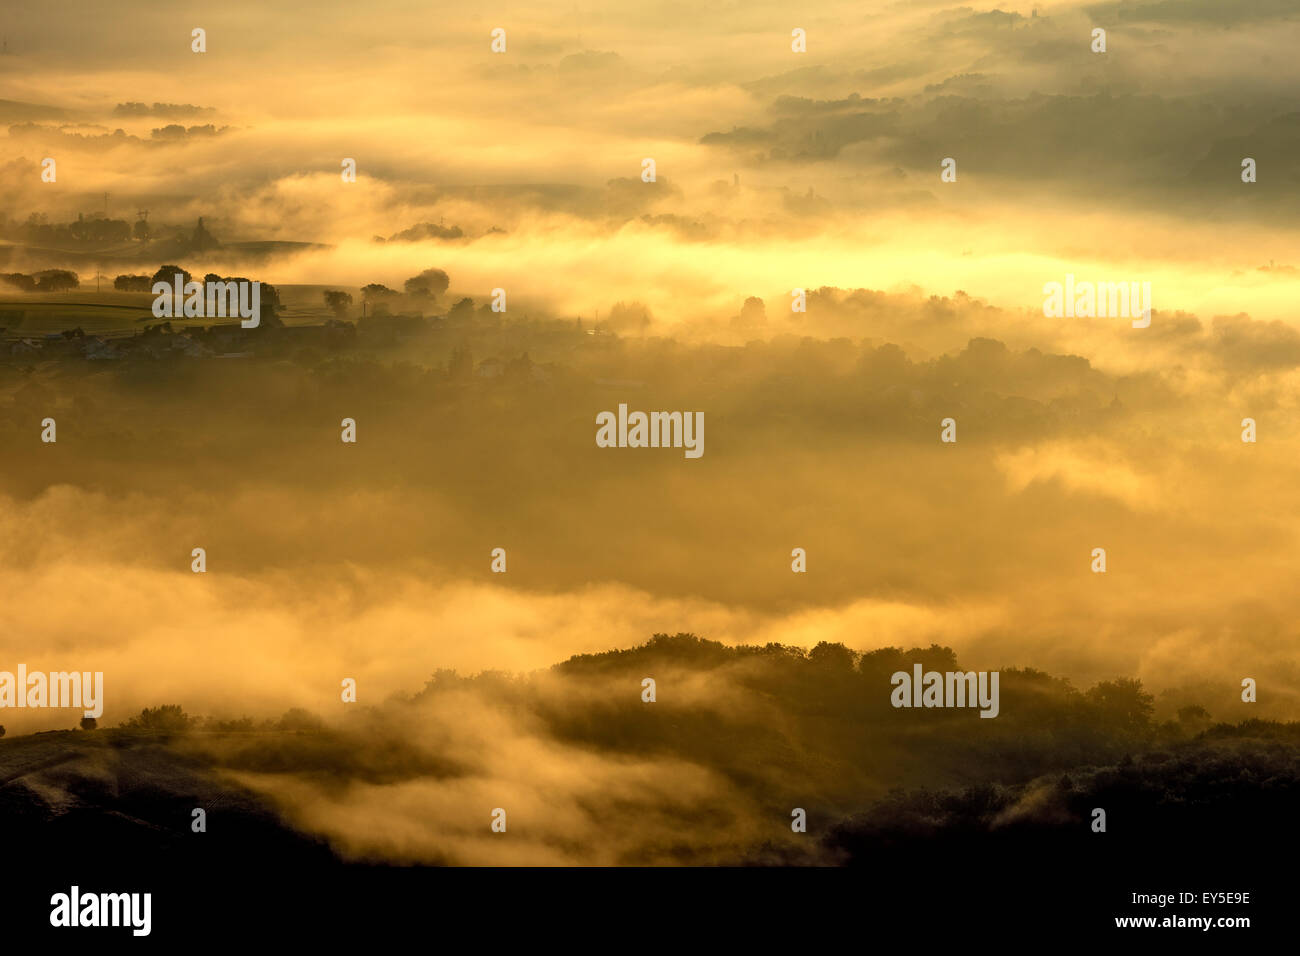 Mists of Savoyard countryside at dawn - France after a stormy night Stock Photo